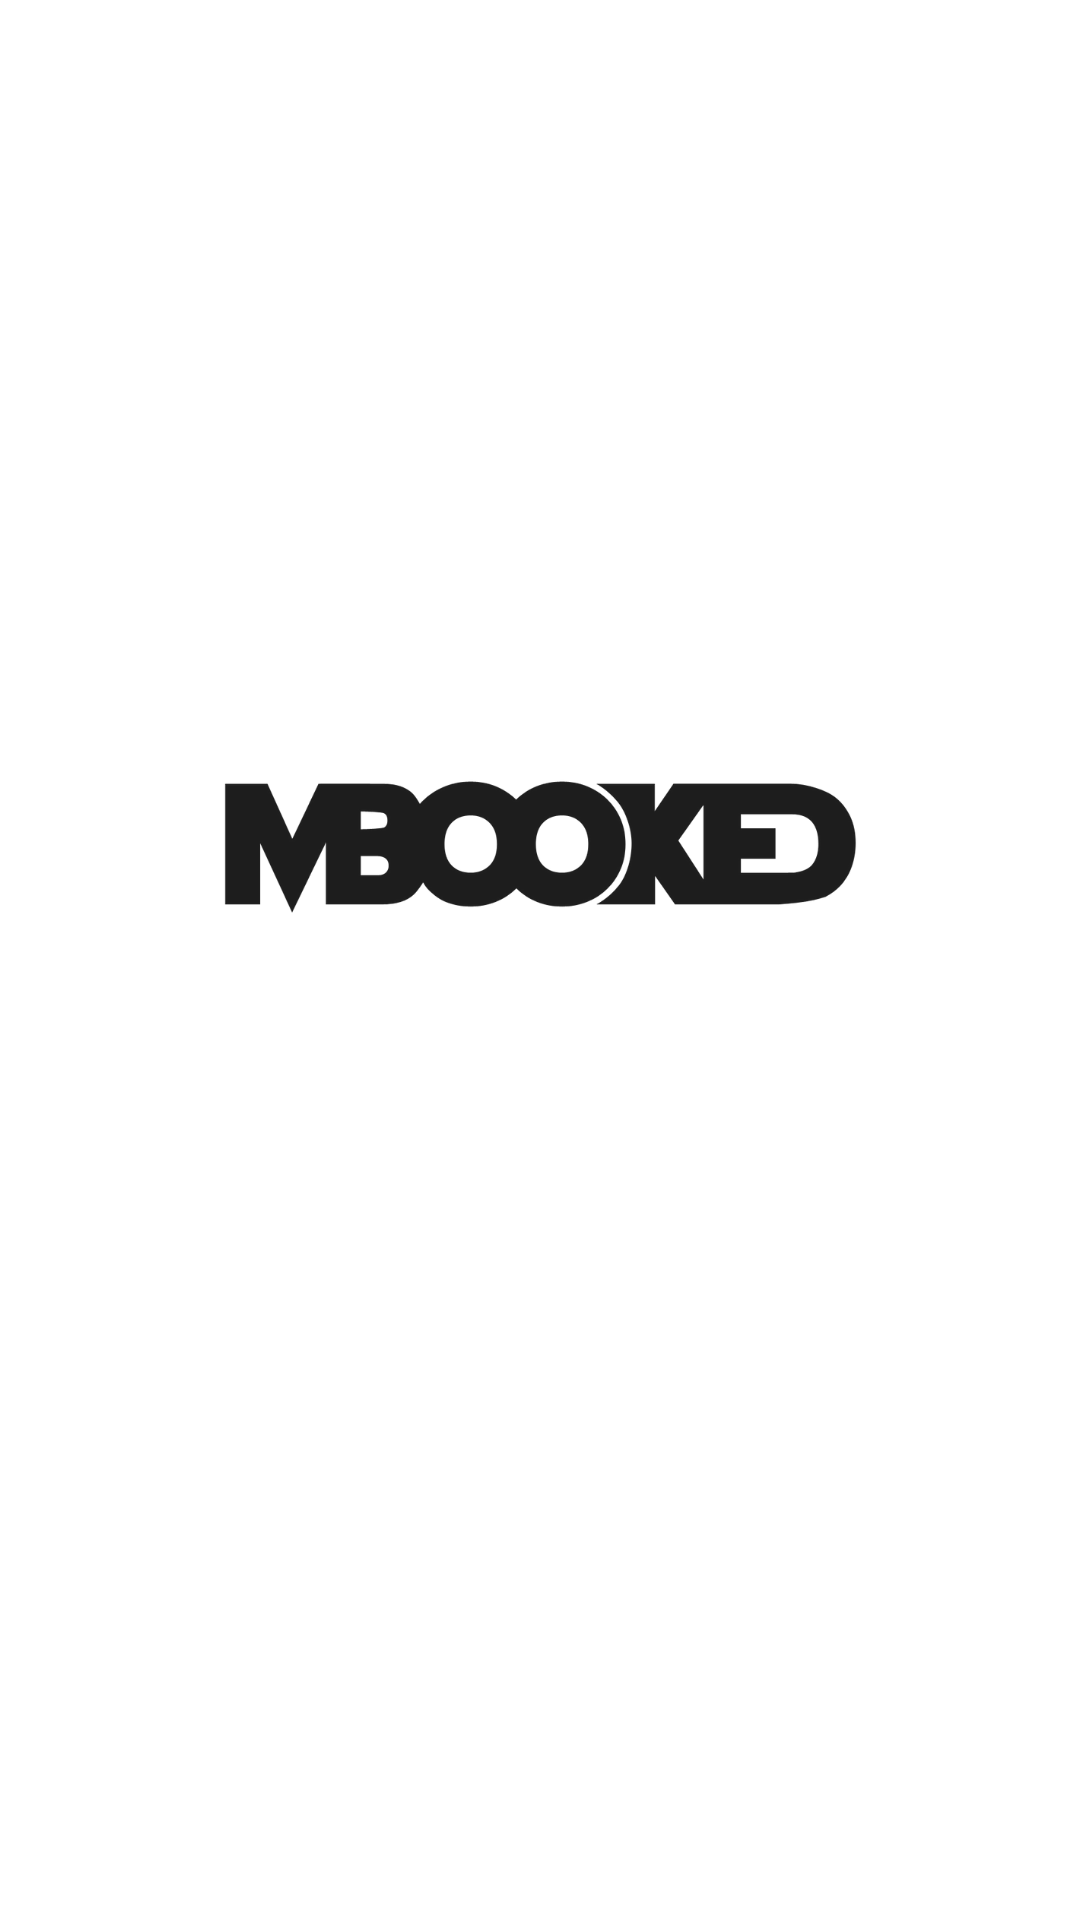 Mbooked